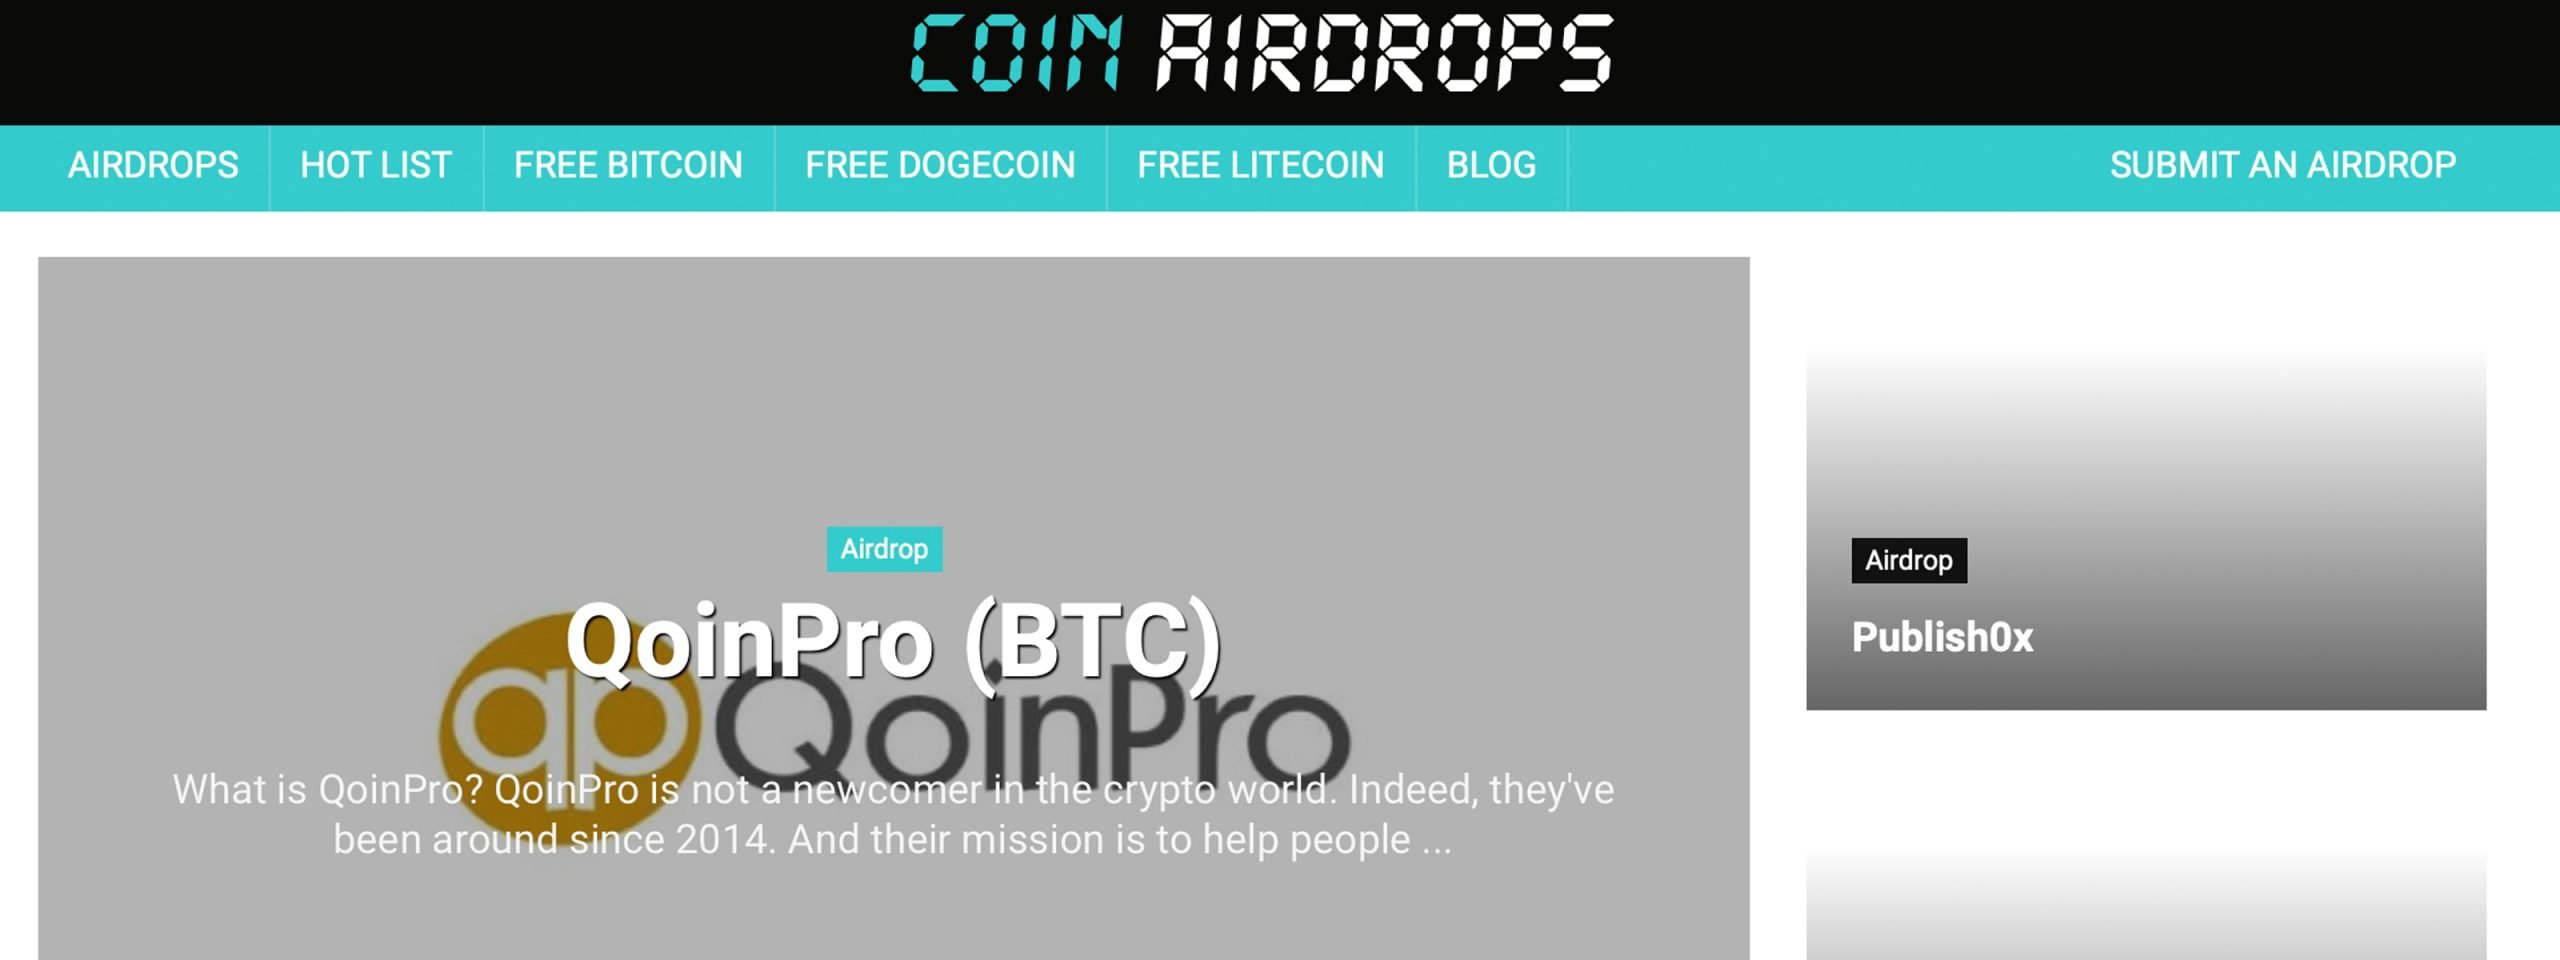 Cryptocurrency Airdrops and Giveaways: What They Are and What's Next